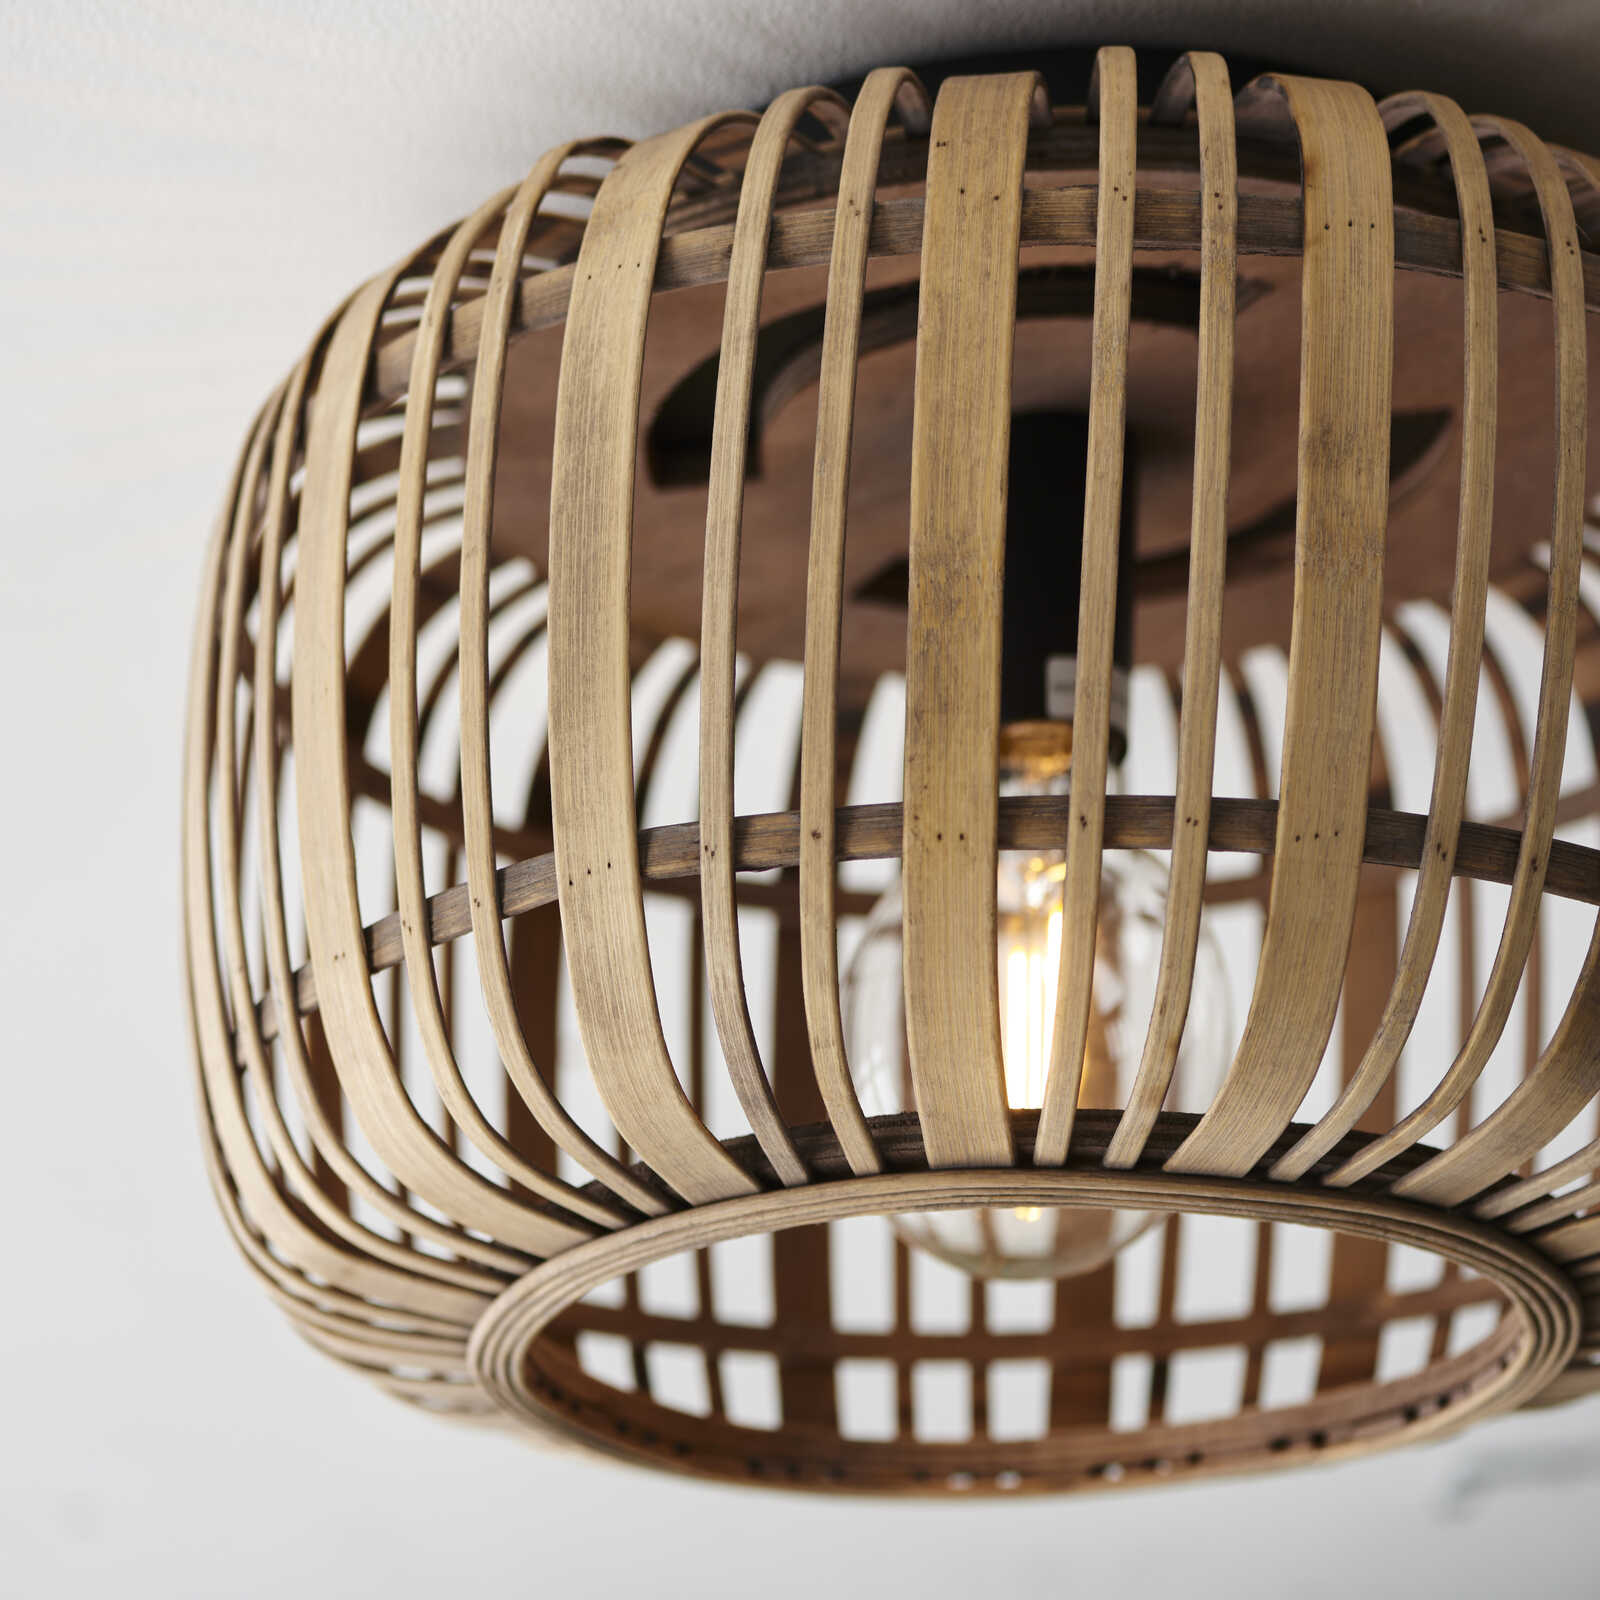             Bamboo ceiling light - Willi 6 - Brown
        